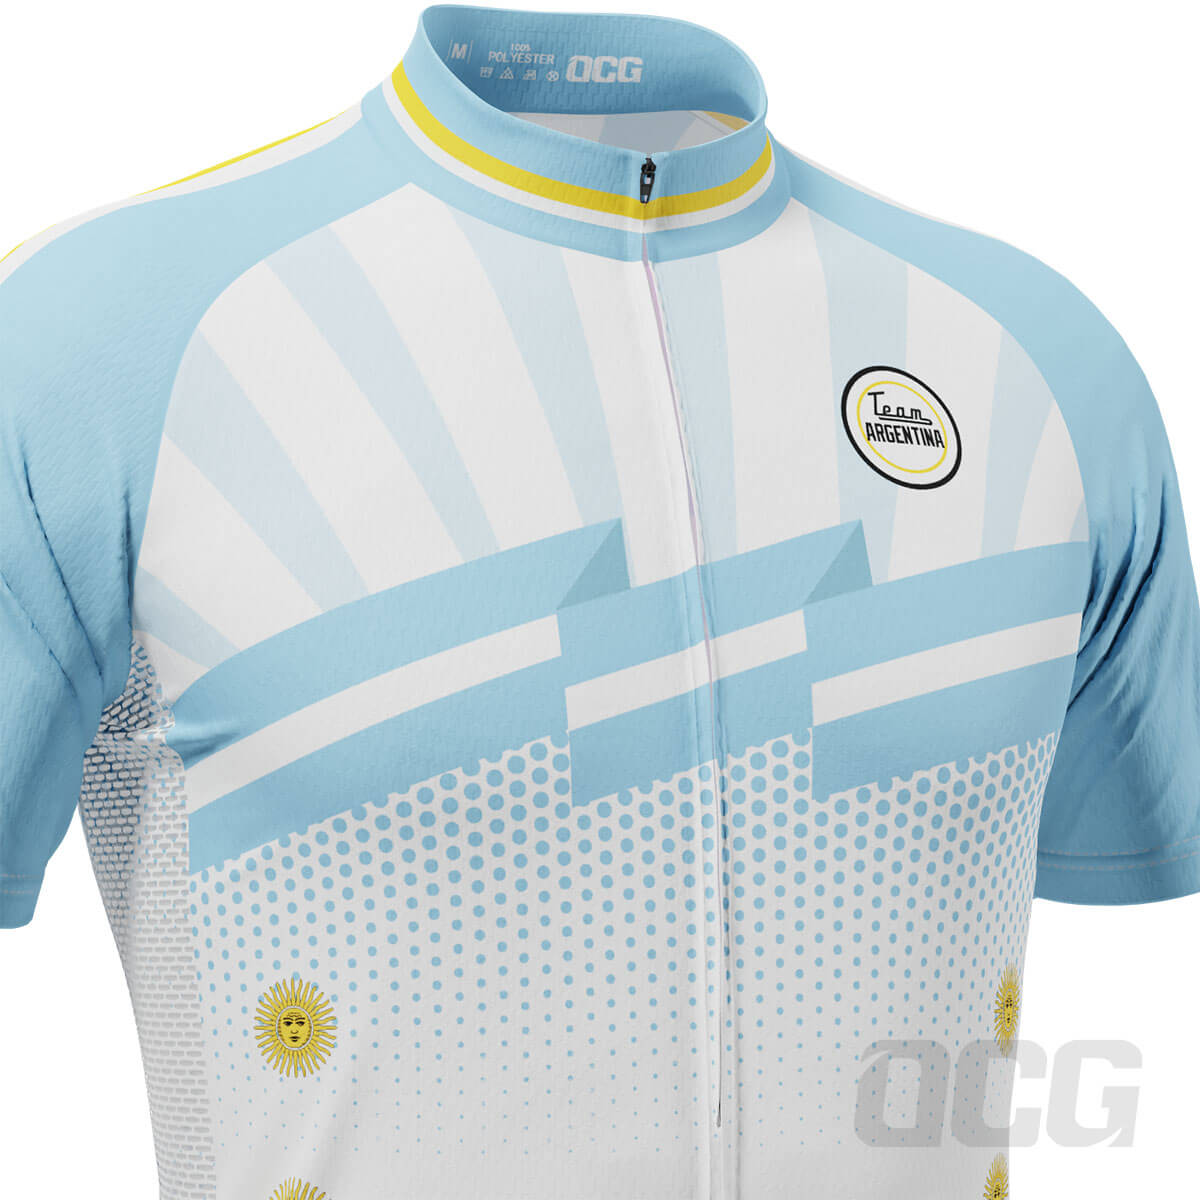 Men's World Countries Team Argentina Icon Short Sleeve Cycling Jersey